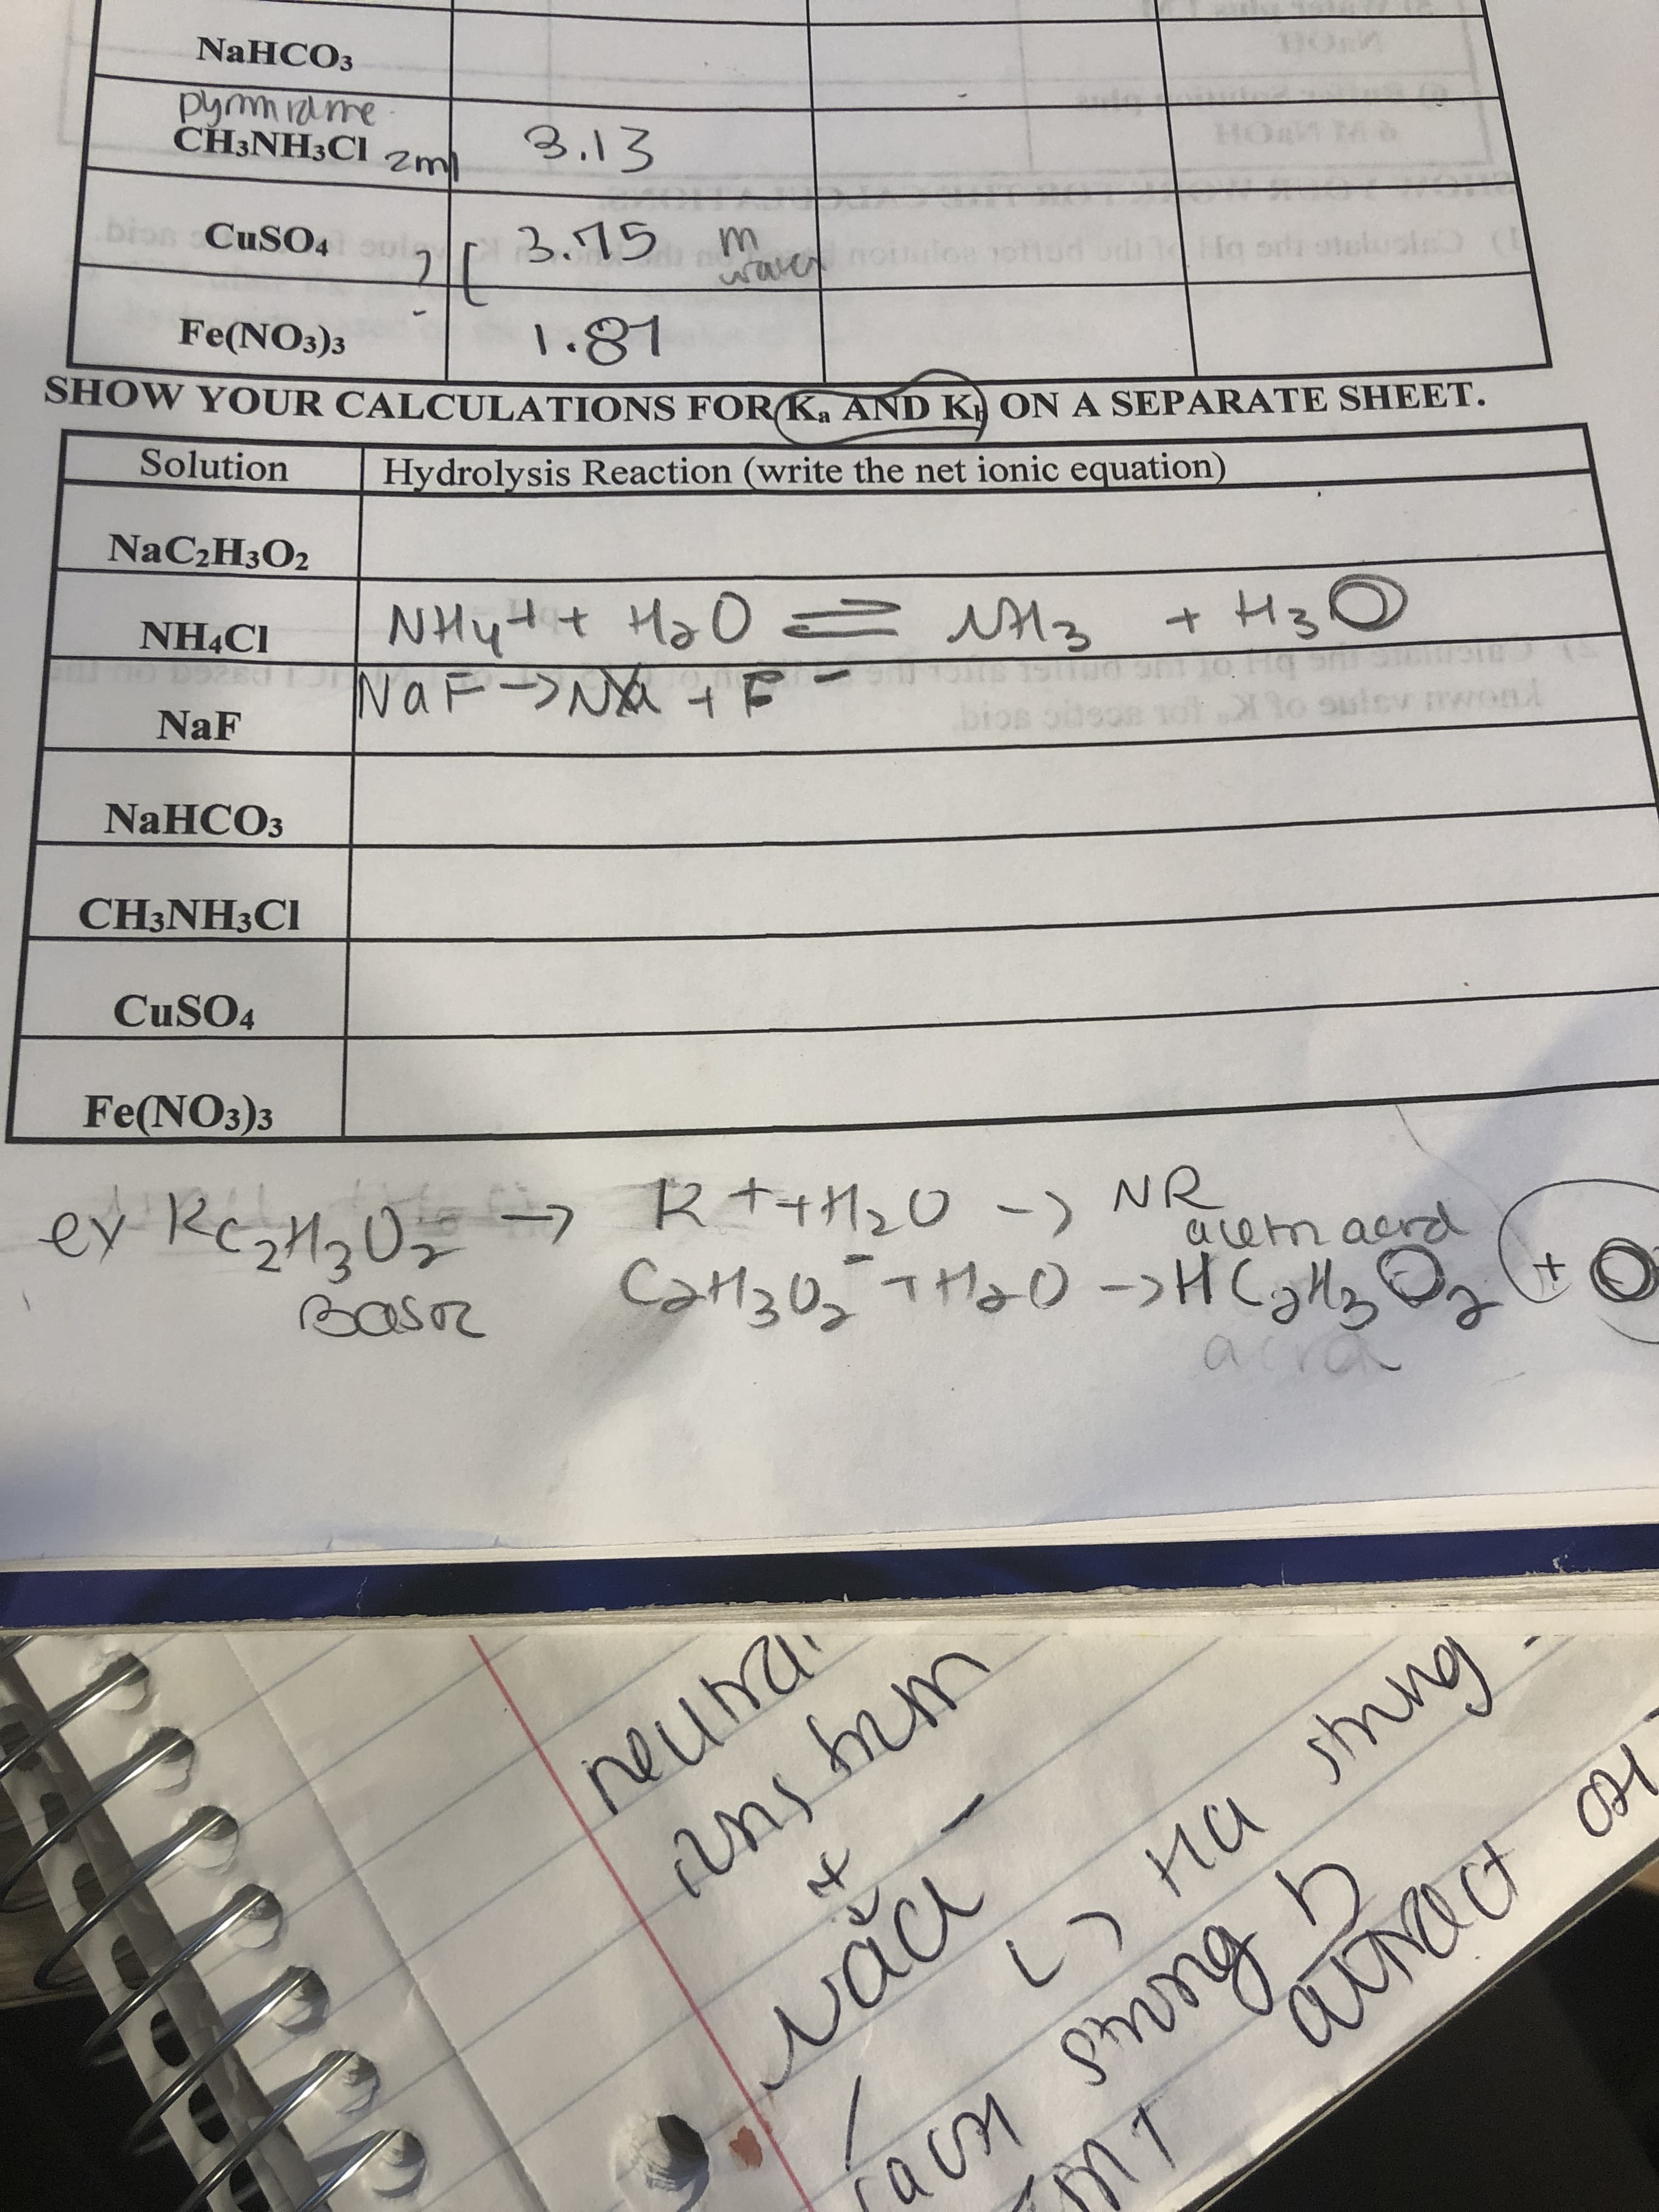 NaHCO3
pymmiame
CH3NH3CI zm
3.13
bion CuSO4 ou
3.75
Fe(NO3)3
waver
1.81
SHOW YOUR CALCULATIONS FOR K, AND K ON A SEPARATE SHEET.
Solution
Hydrolysis Reaction (write the net ionic equation)
NaC2H3O2
NHẠCI
NaF-NA
NaF
NaHCO3
rond
CH3NH3CI
CUSO4
Fe(NO3)3
ex Resh Oz - Rt+M20 -) NR
R++M20-)
Cag05フな0ー>HCgMg O。 t O
aem acrd
Basor
ans hum
uns
wac
Ha sung
neura
facm smng
